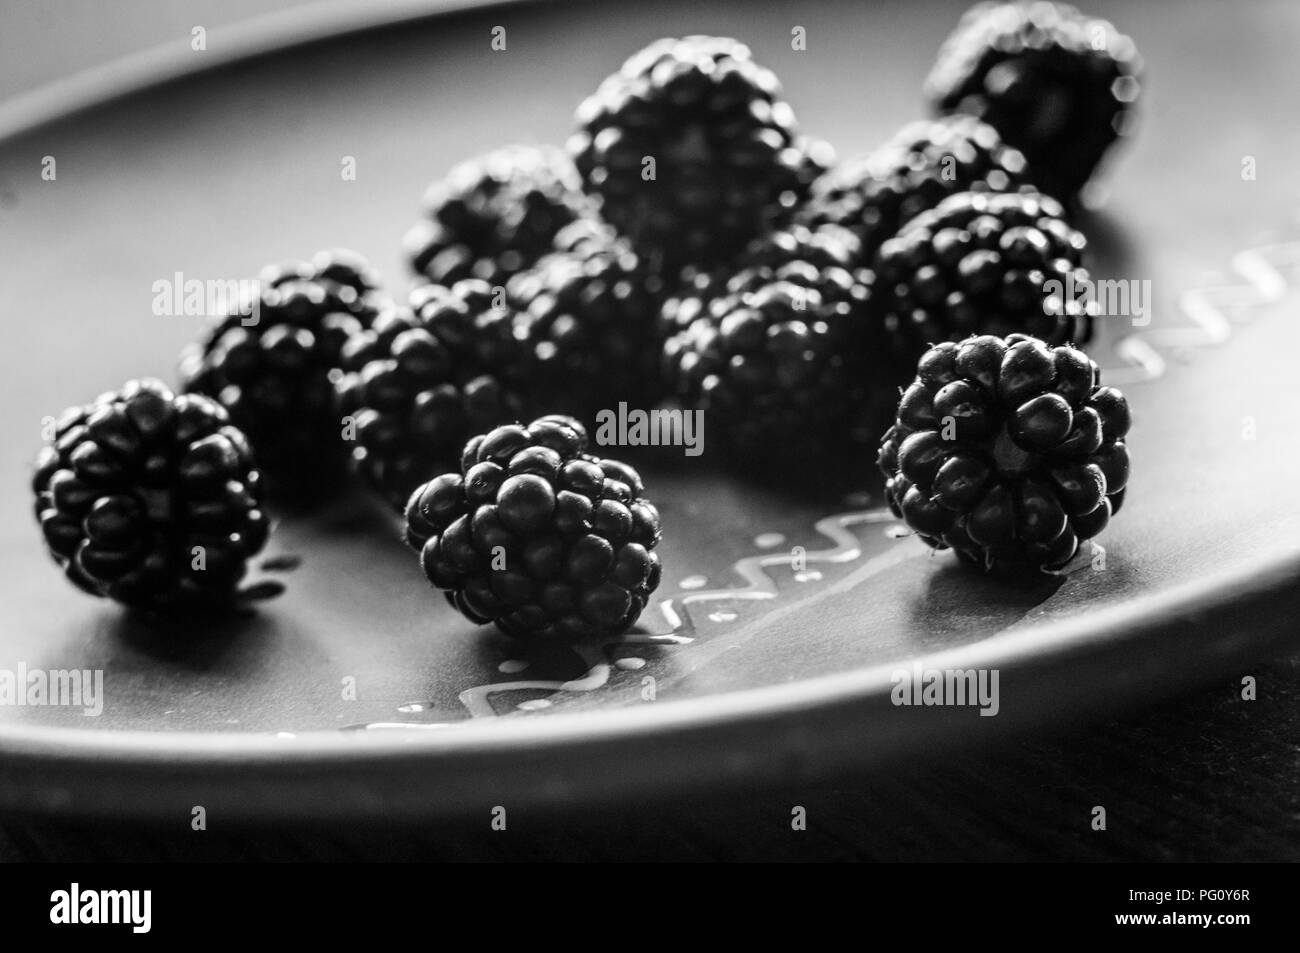 large juicy fresh blackberry berries on a ceramic plate, close-up Stock Photo